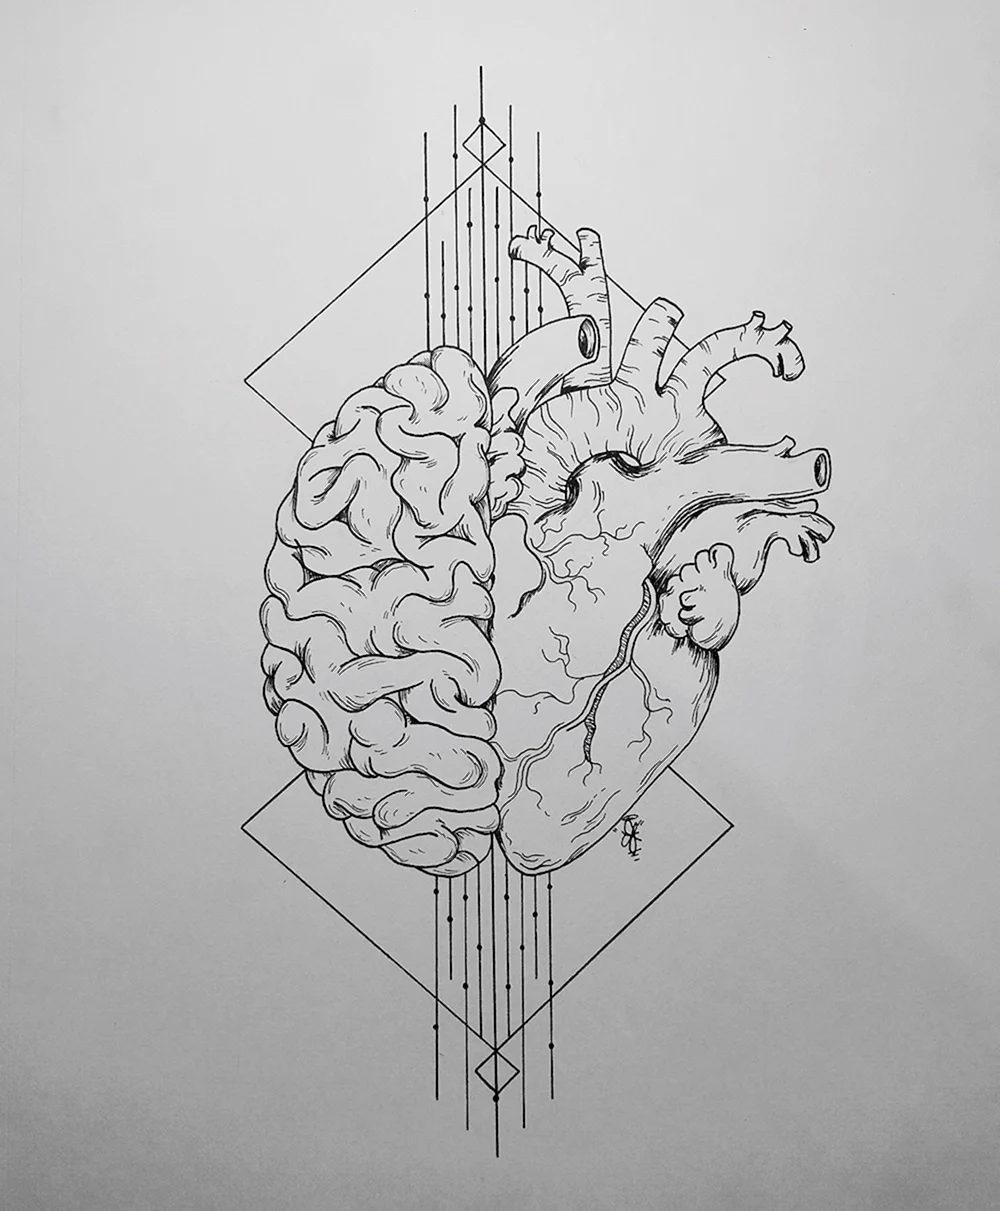 Heart and Brain Sketch